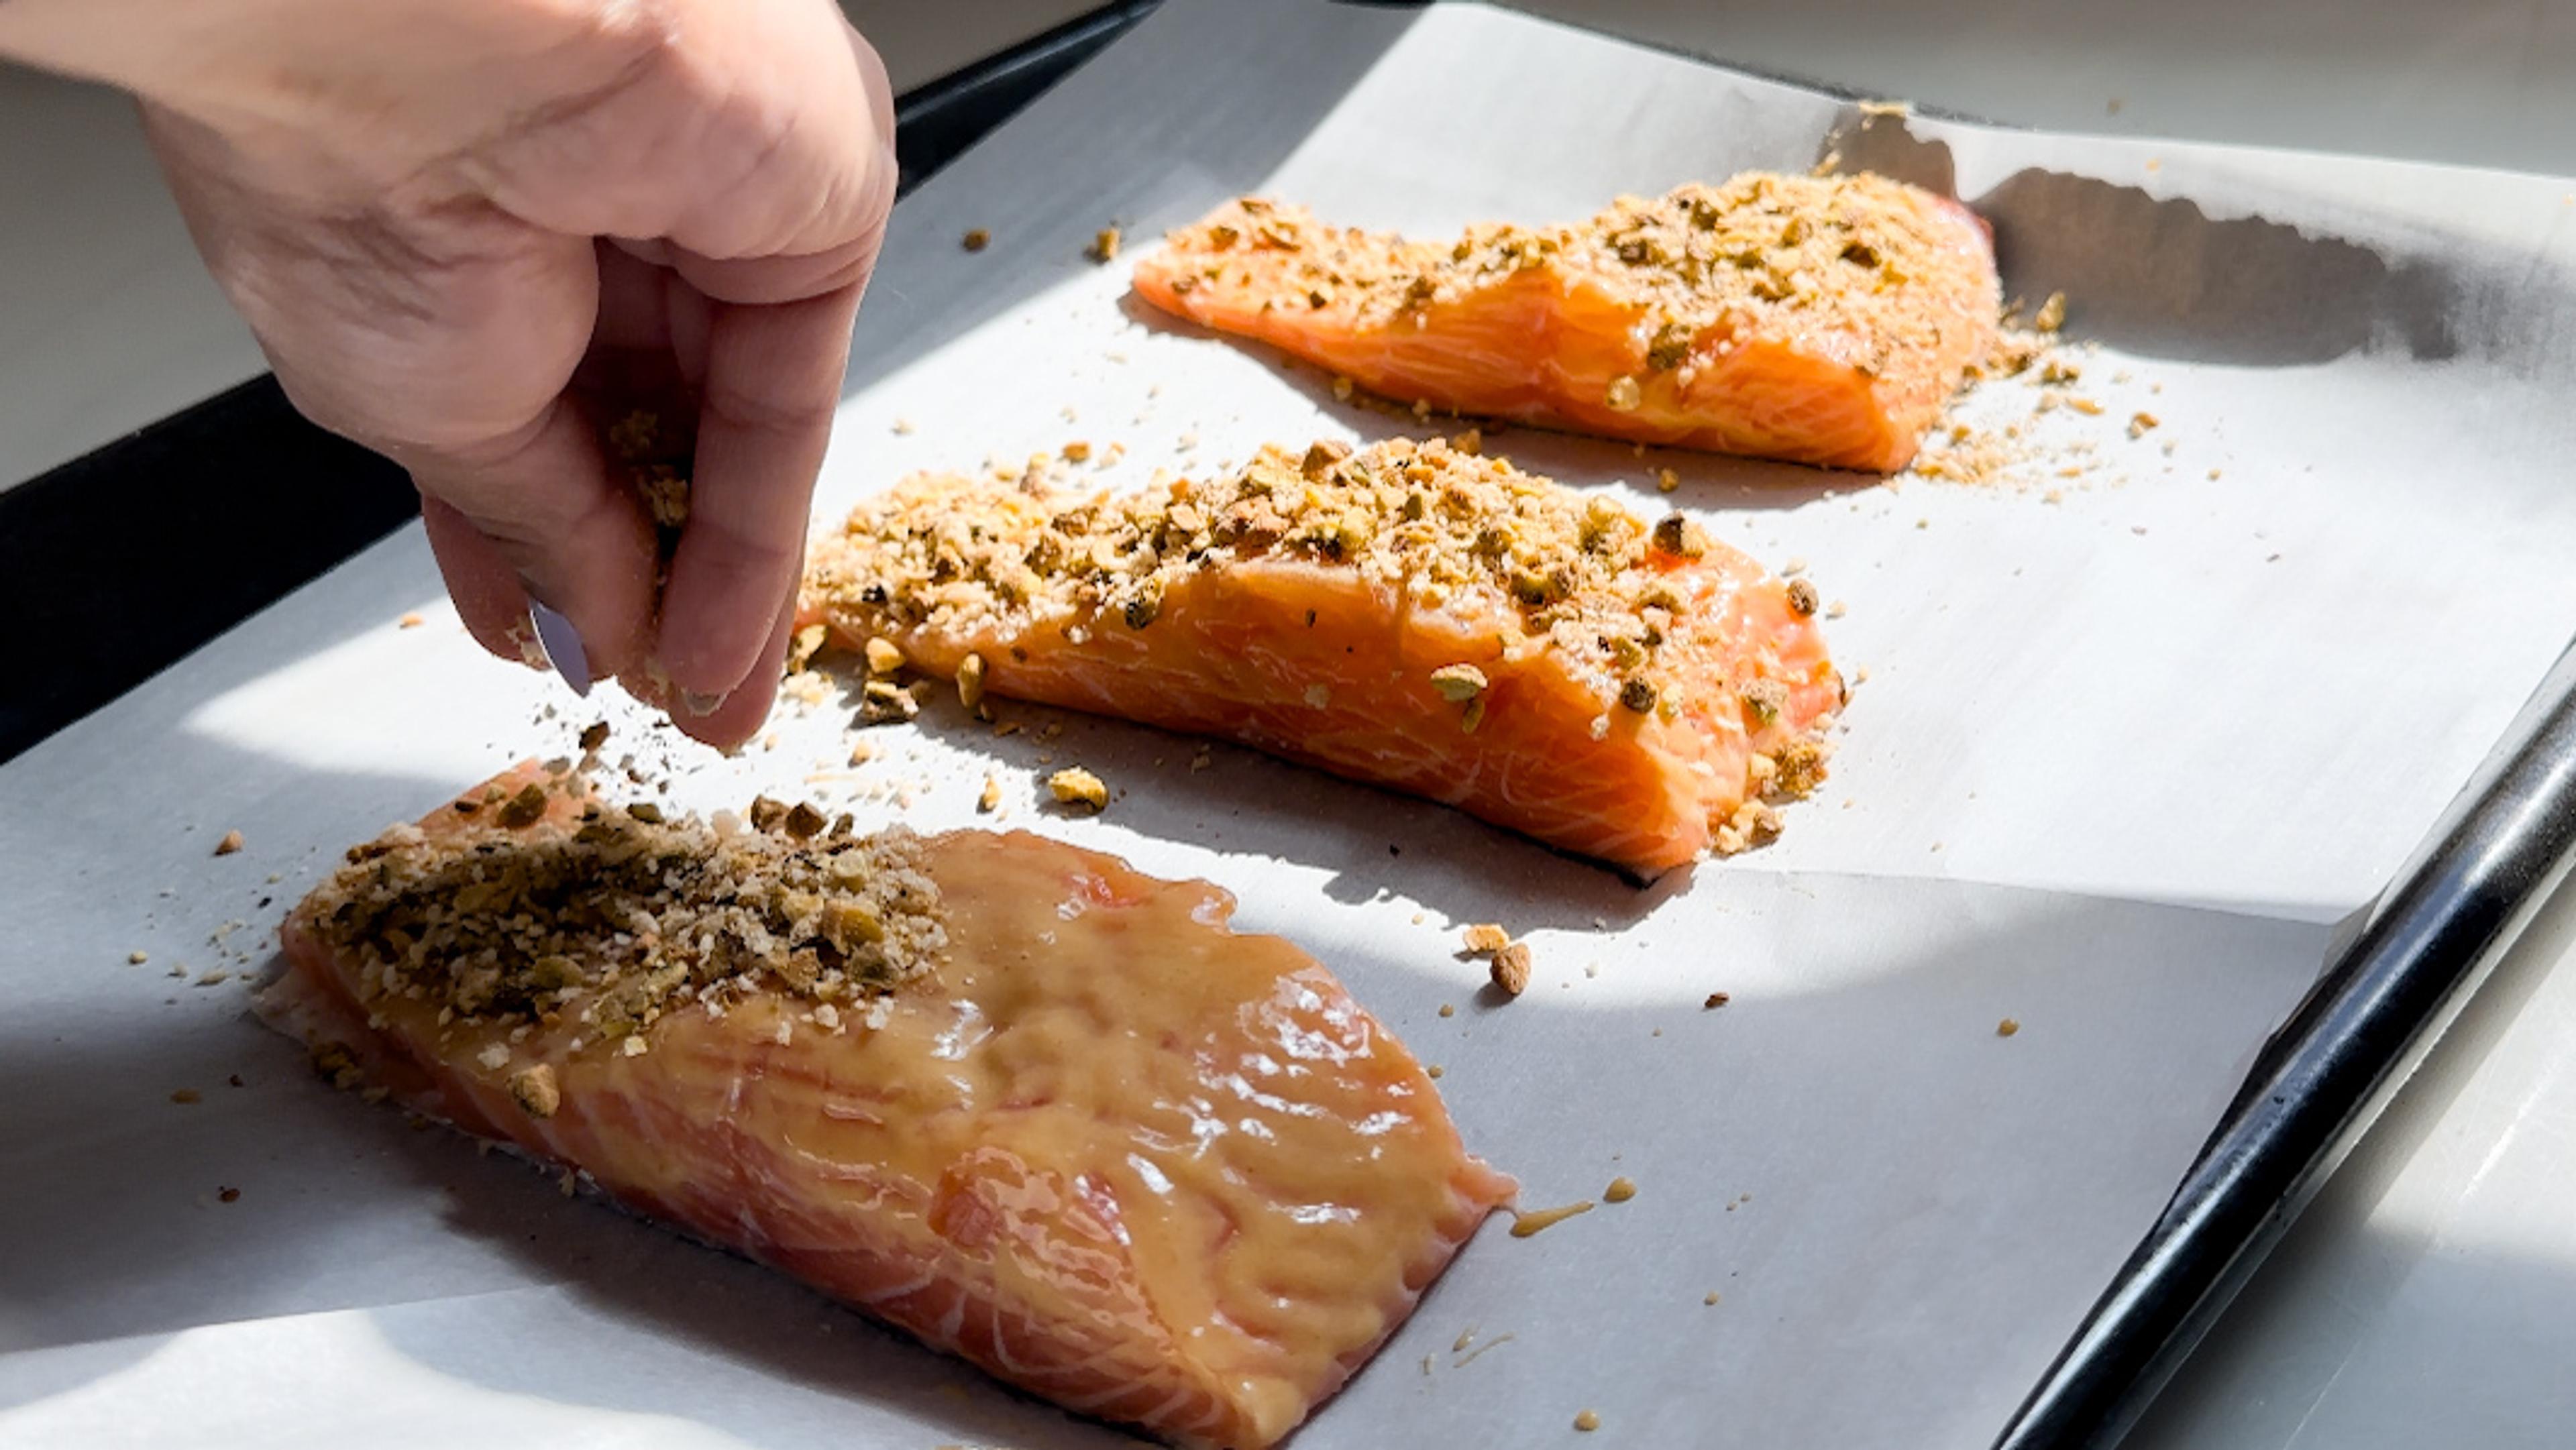 Pour over the pistachio mixture over the salmon, pressing down to allow it to stick. Place on a lined baking sheet.